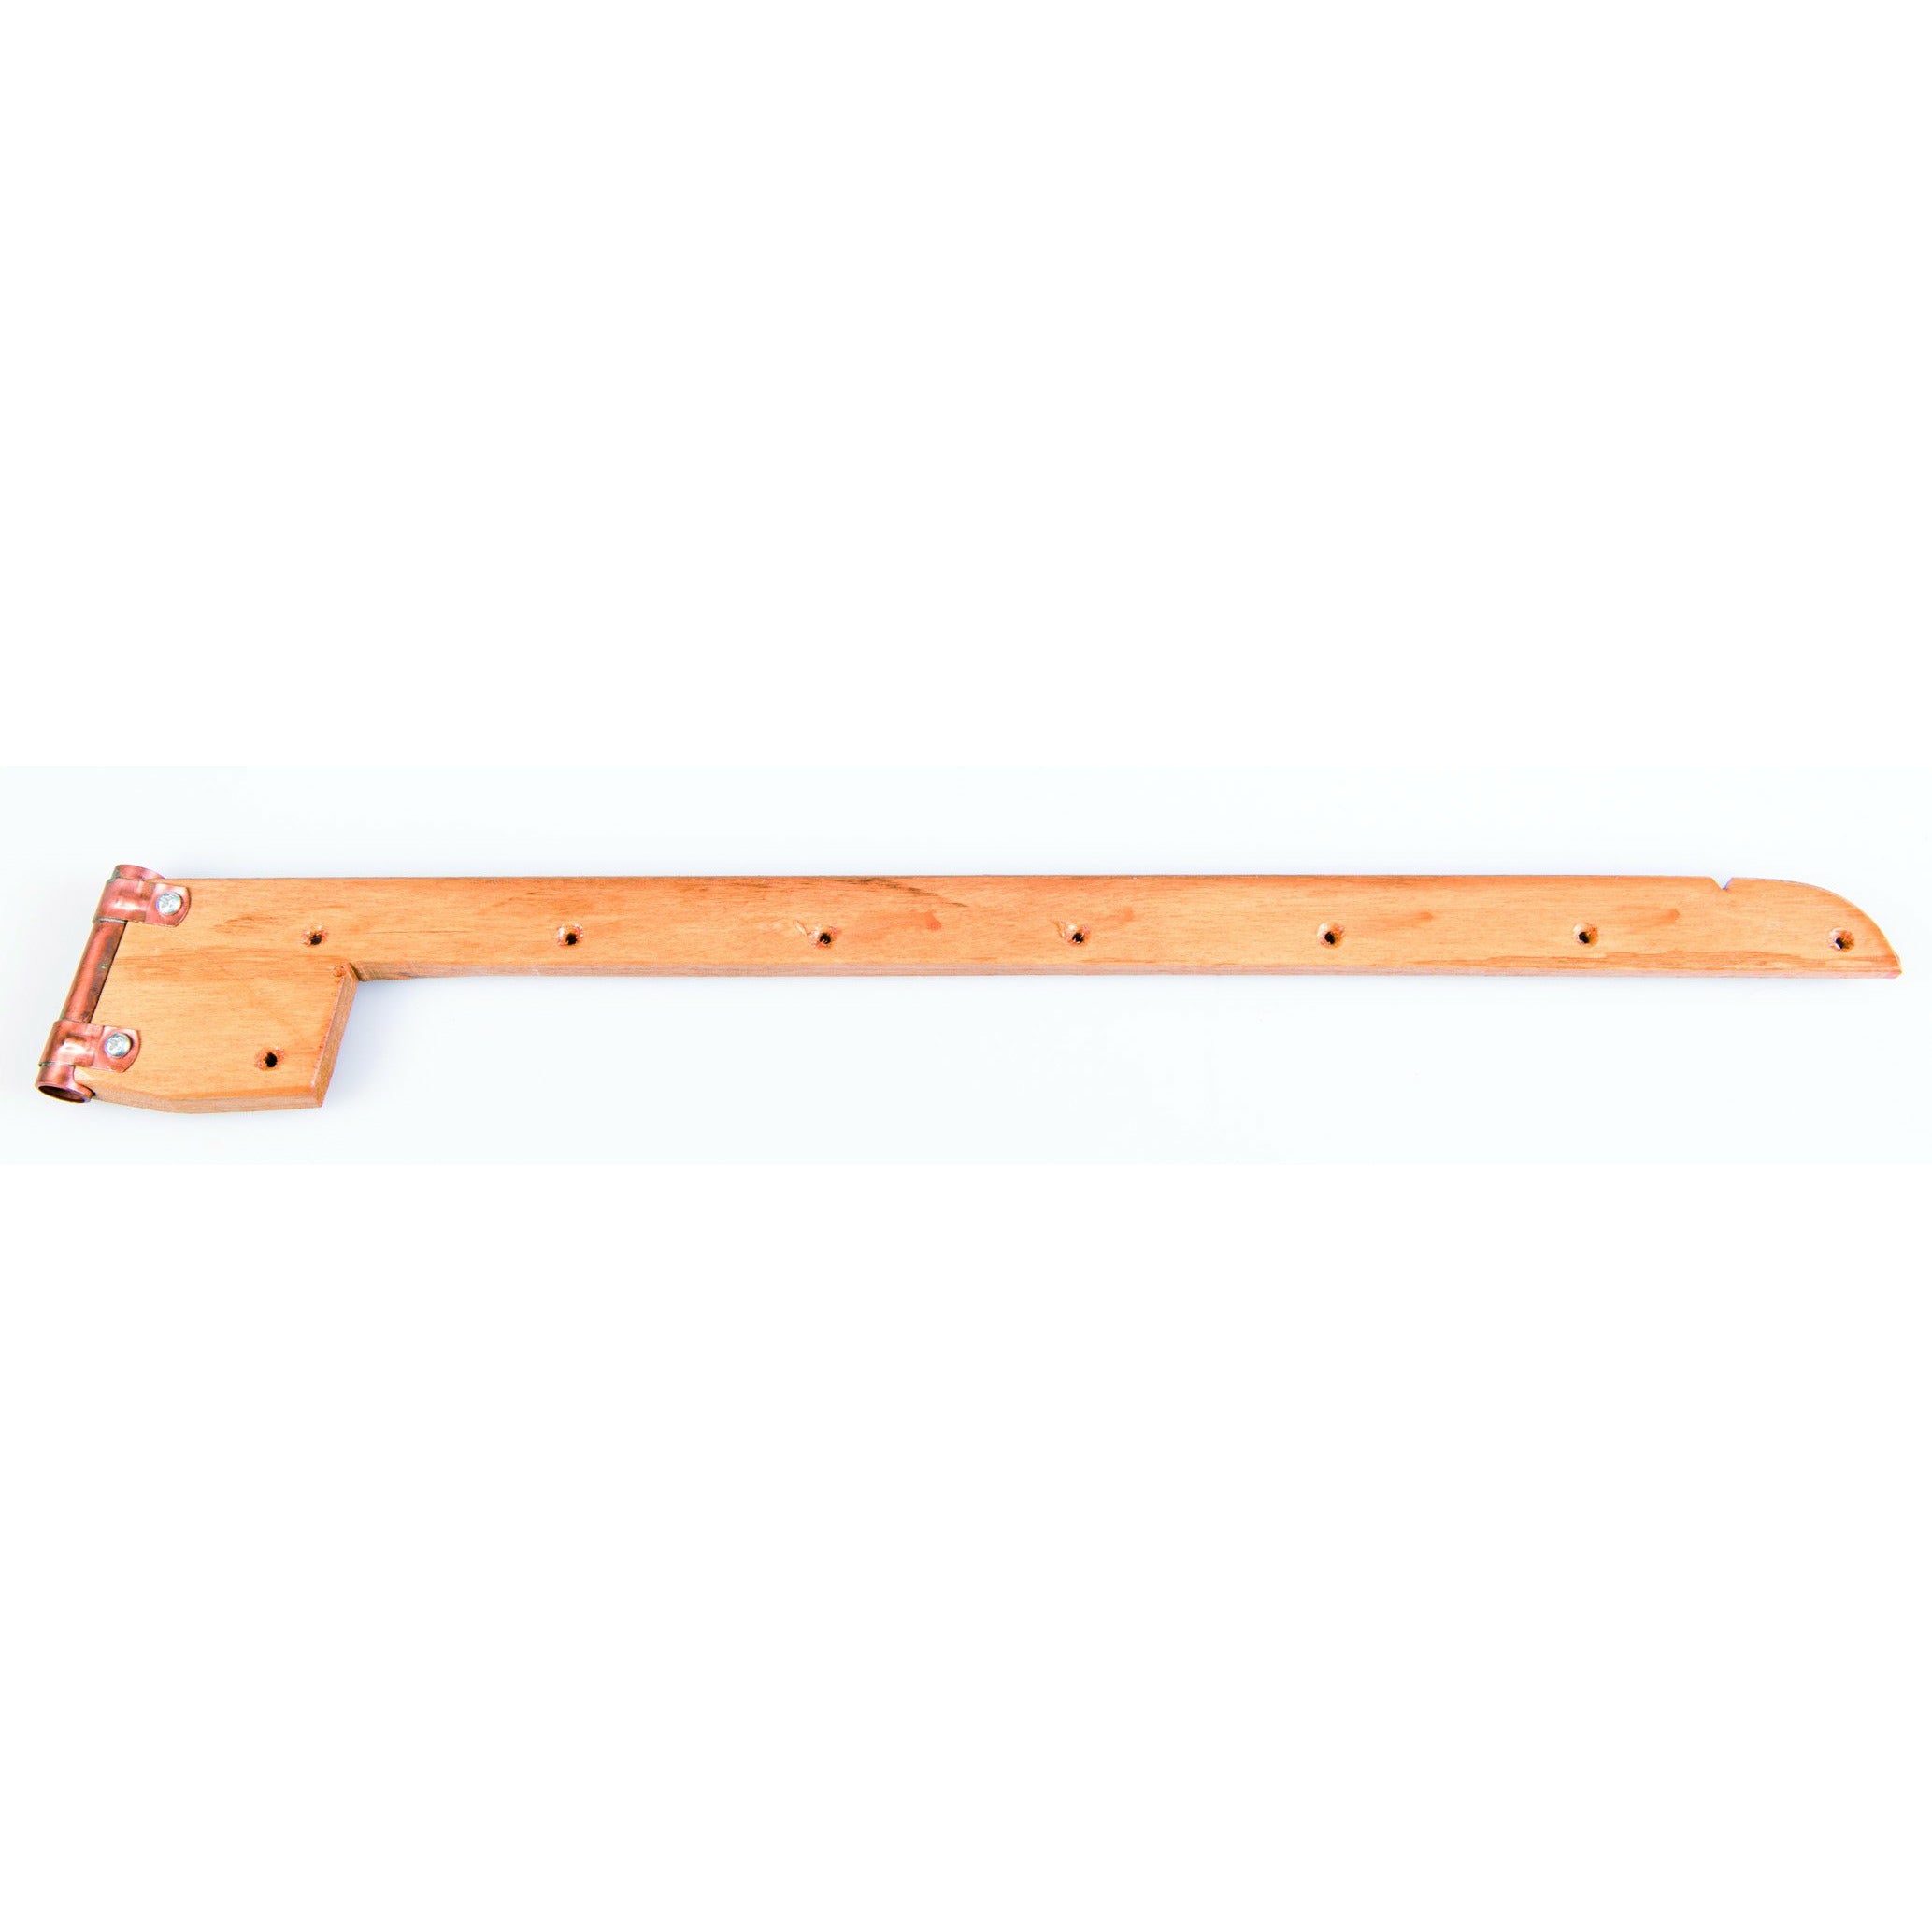 Talamex Wooden Piece For Burgee 27518001